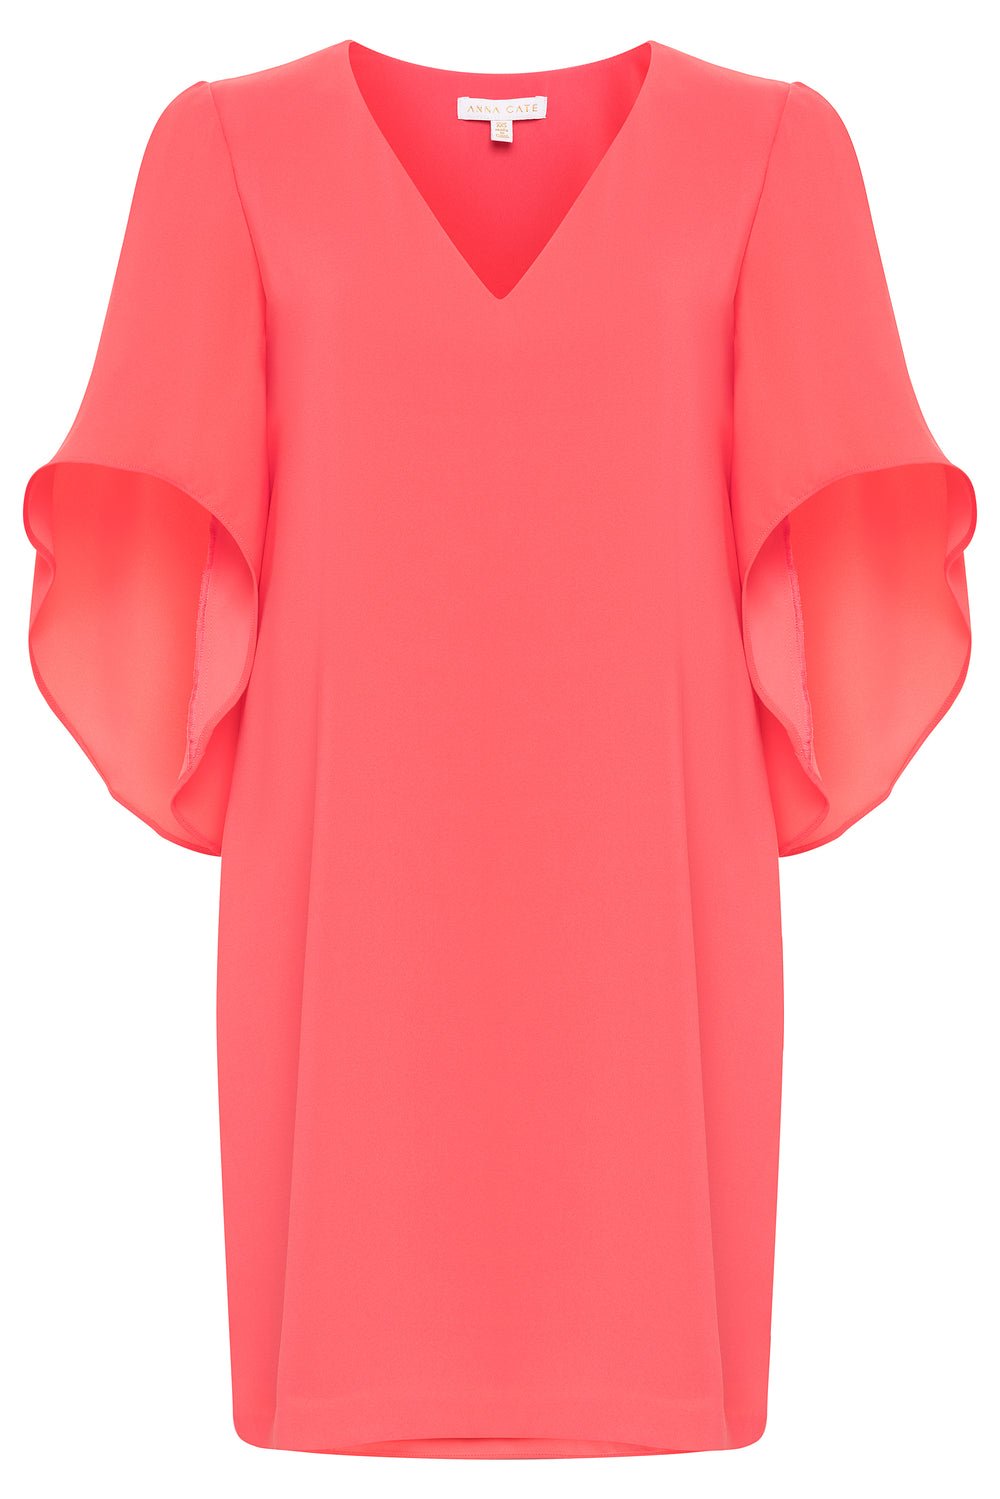 Anna Cate - Meredith S/S Dress - Fusion Coral – Shorely Chic Boutique